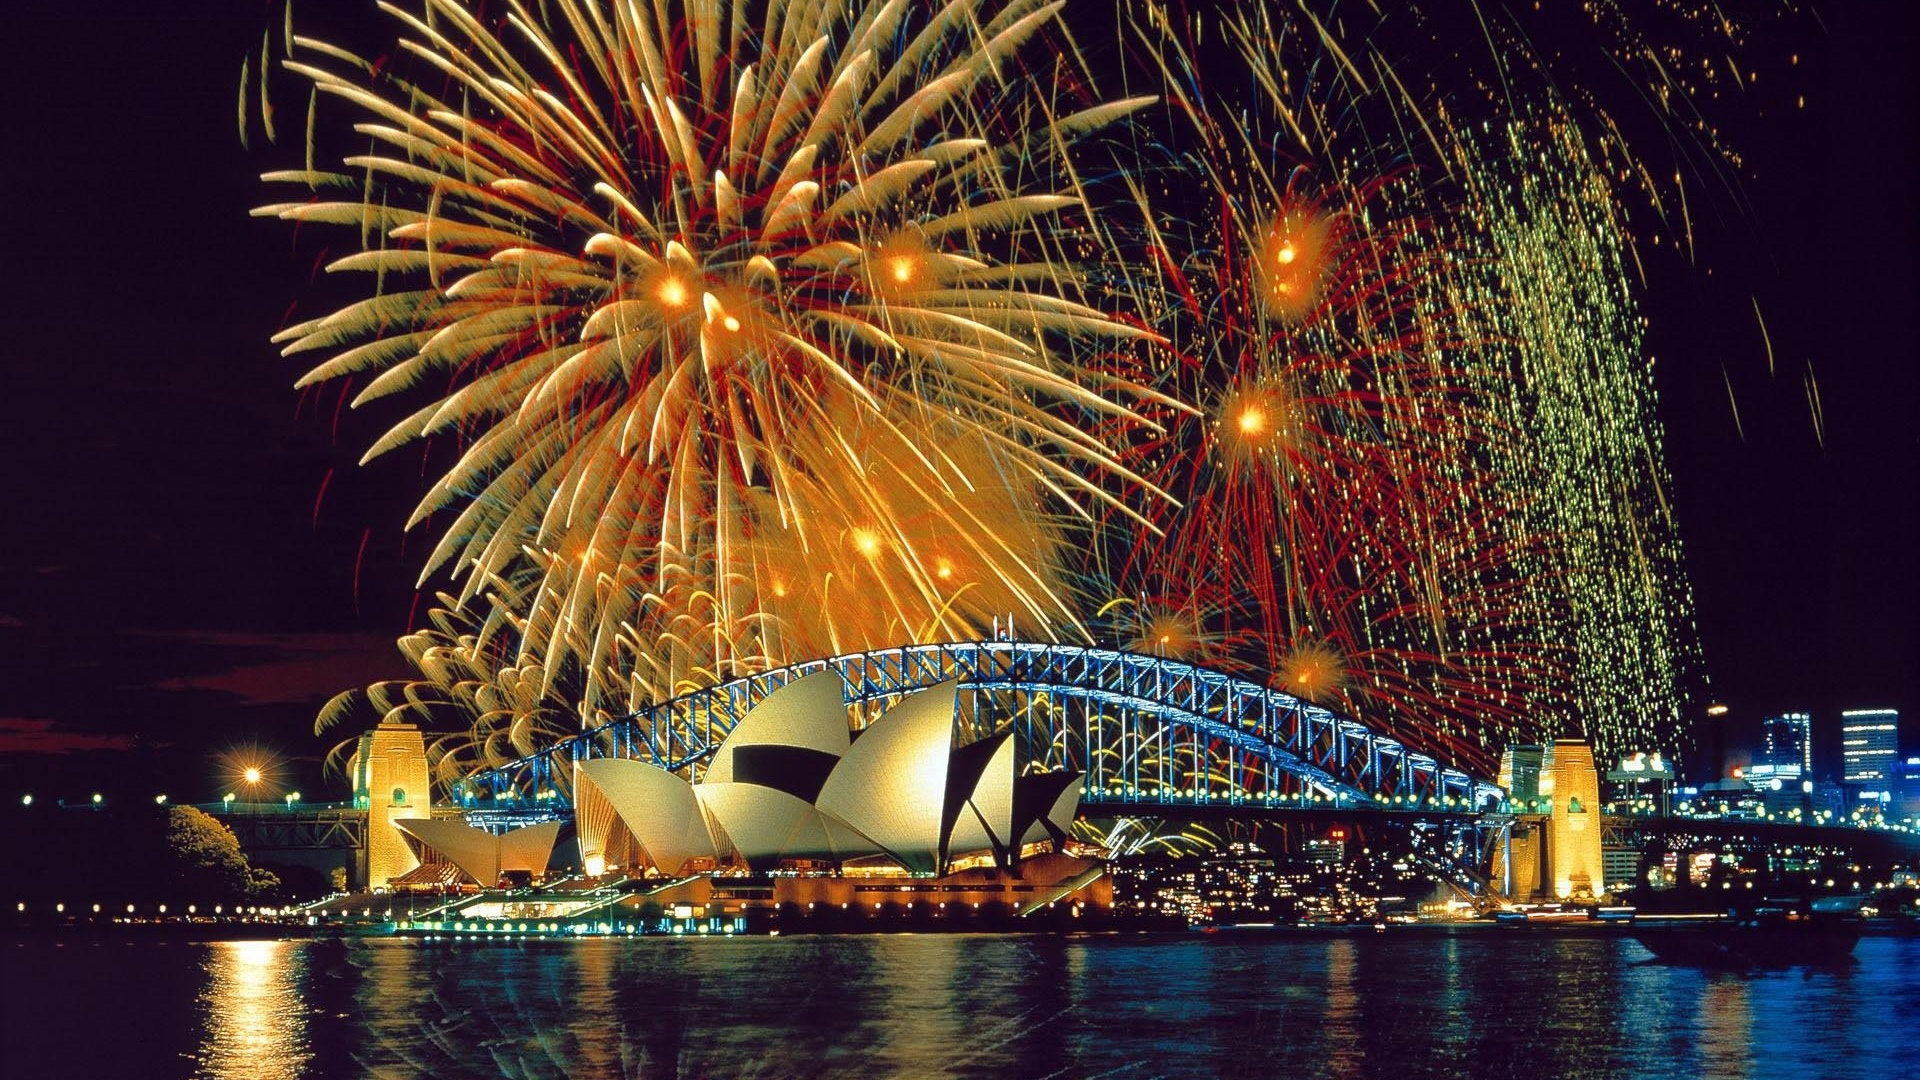 Fireworks Over the Sydney Opera House and Harbor Bridge for 1920 x 1080 HDTV 1080p resolution